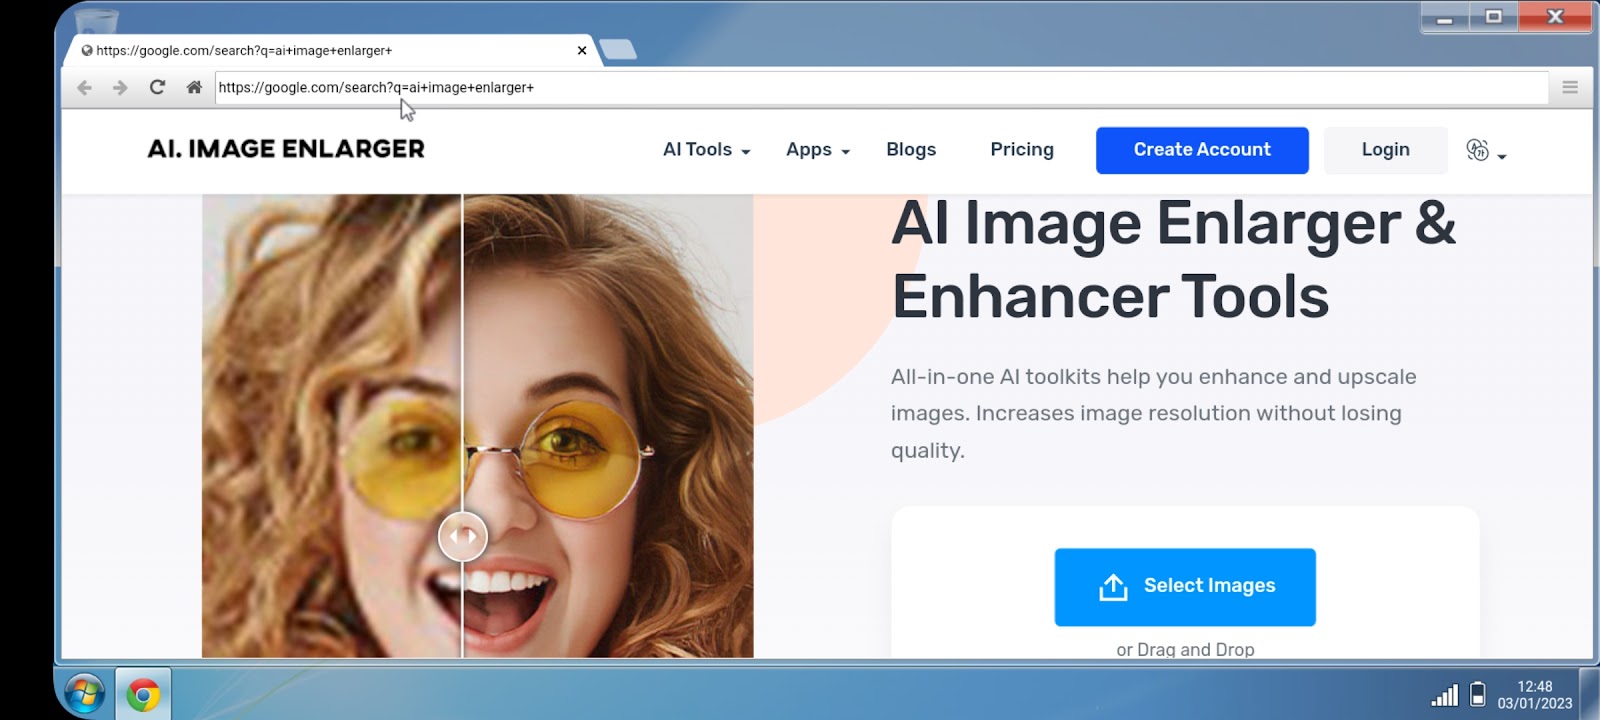 Login to your account on AI image Enlarger